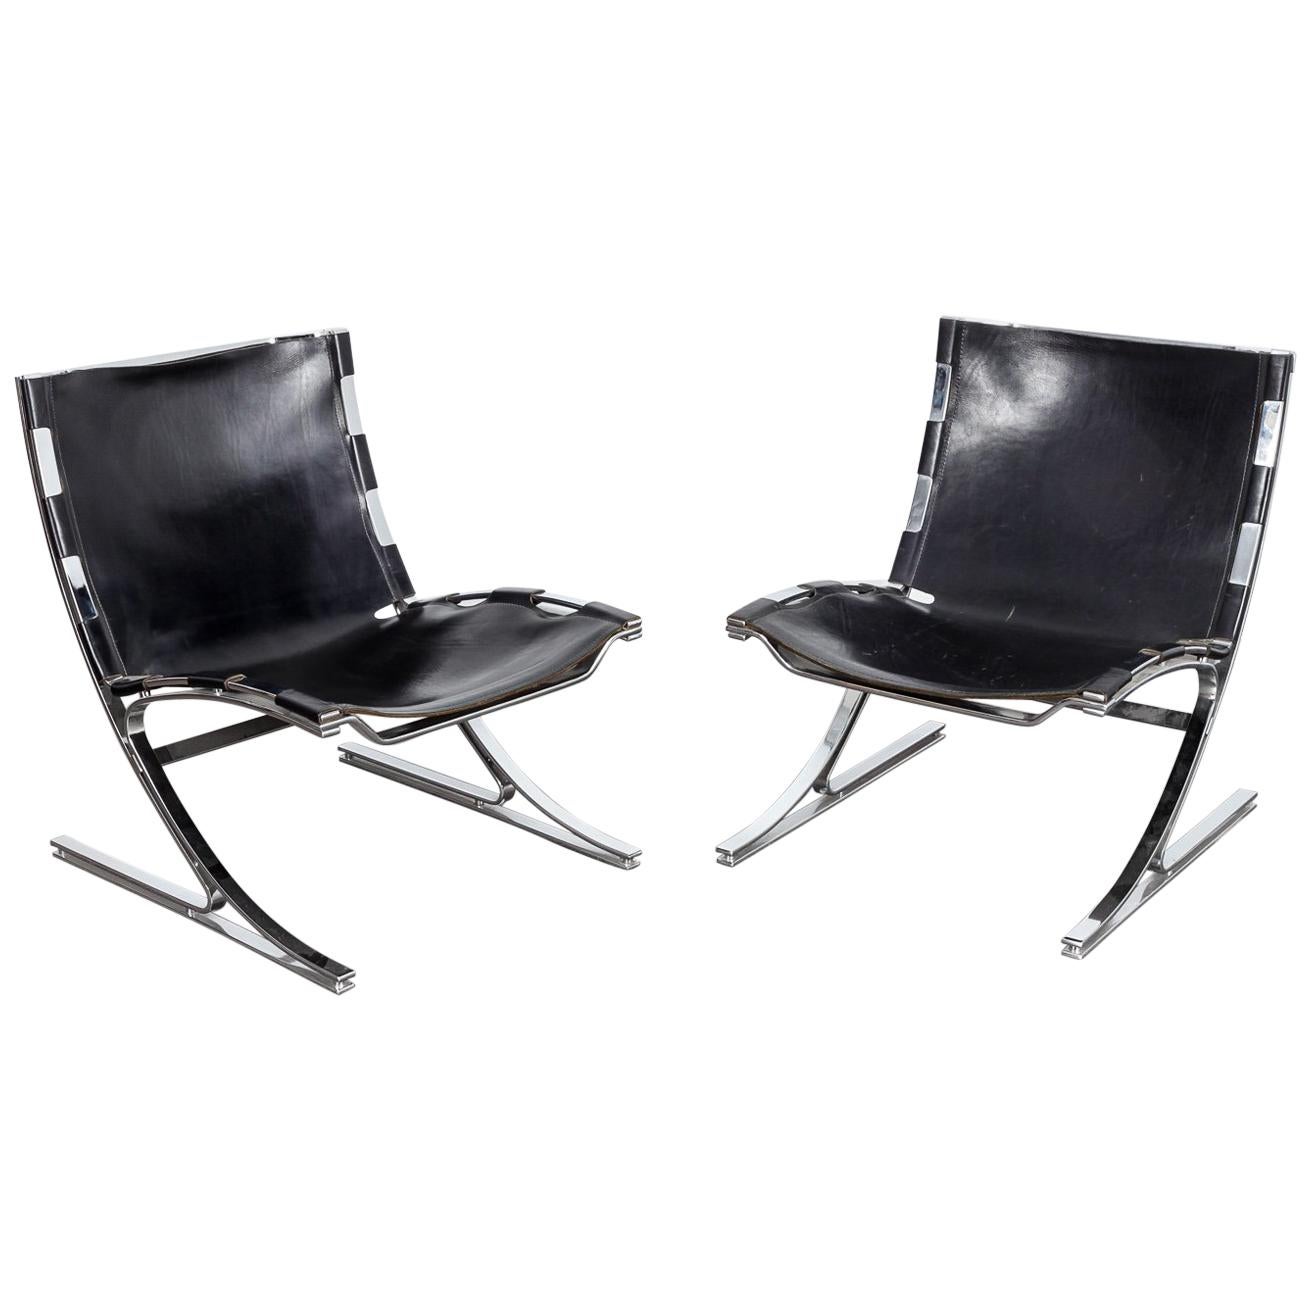 Pair of Leather and Chrome Designed Chairs by Architect Meinhard Von Gerkan